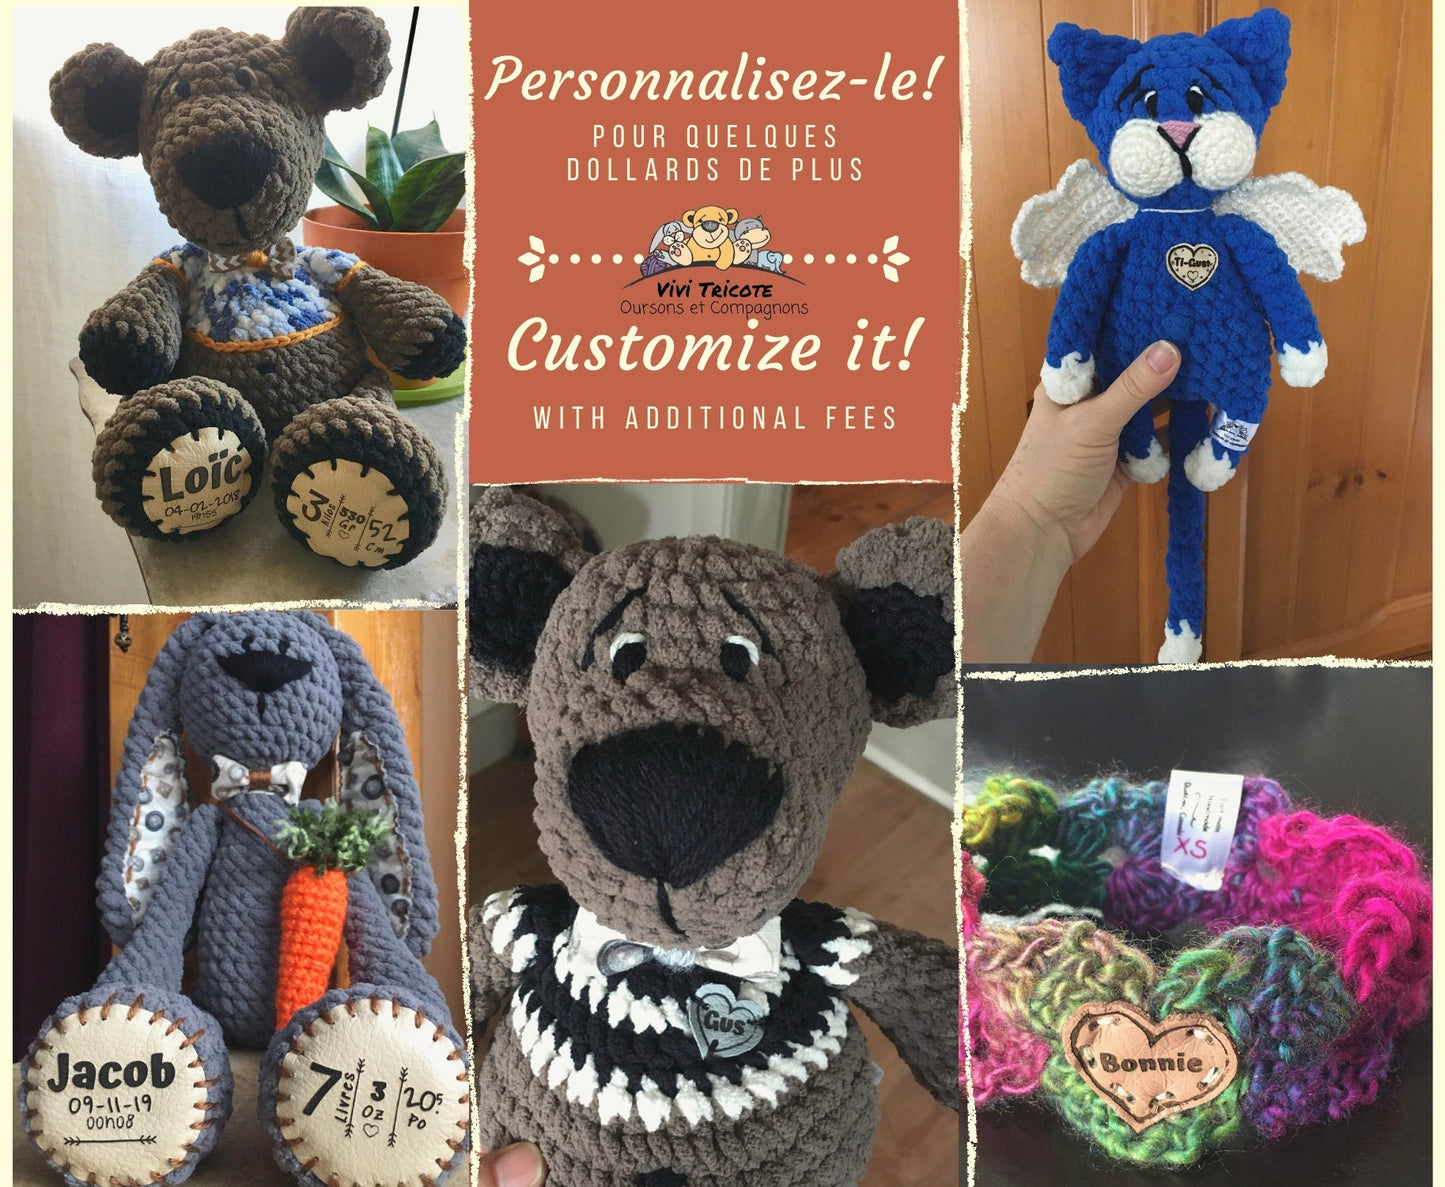 The Lady MOOSE PLUSHIE, (NONORIGNAL in french) Lumberjack Style, the plush America momentum, can be personalized in plushie of birth